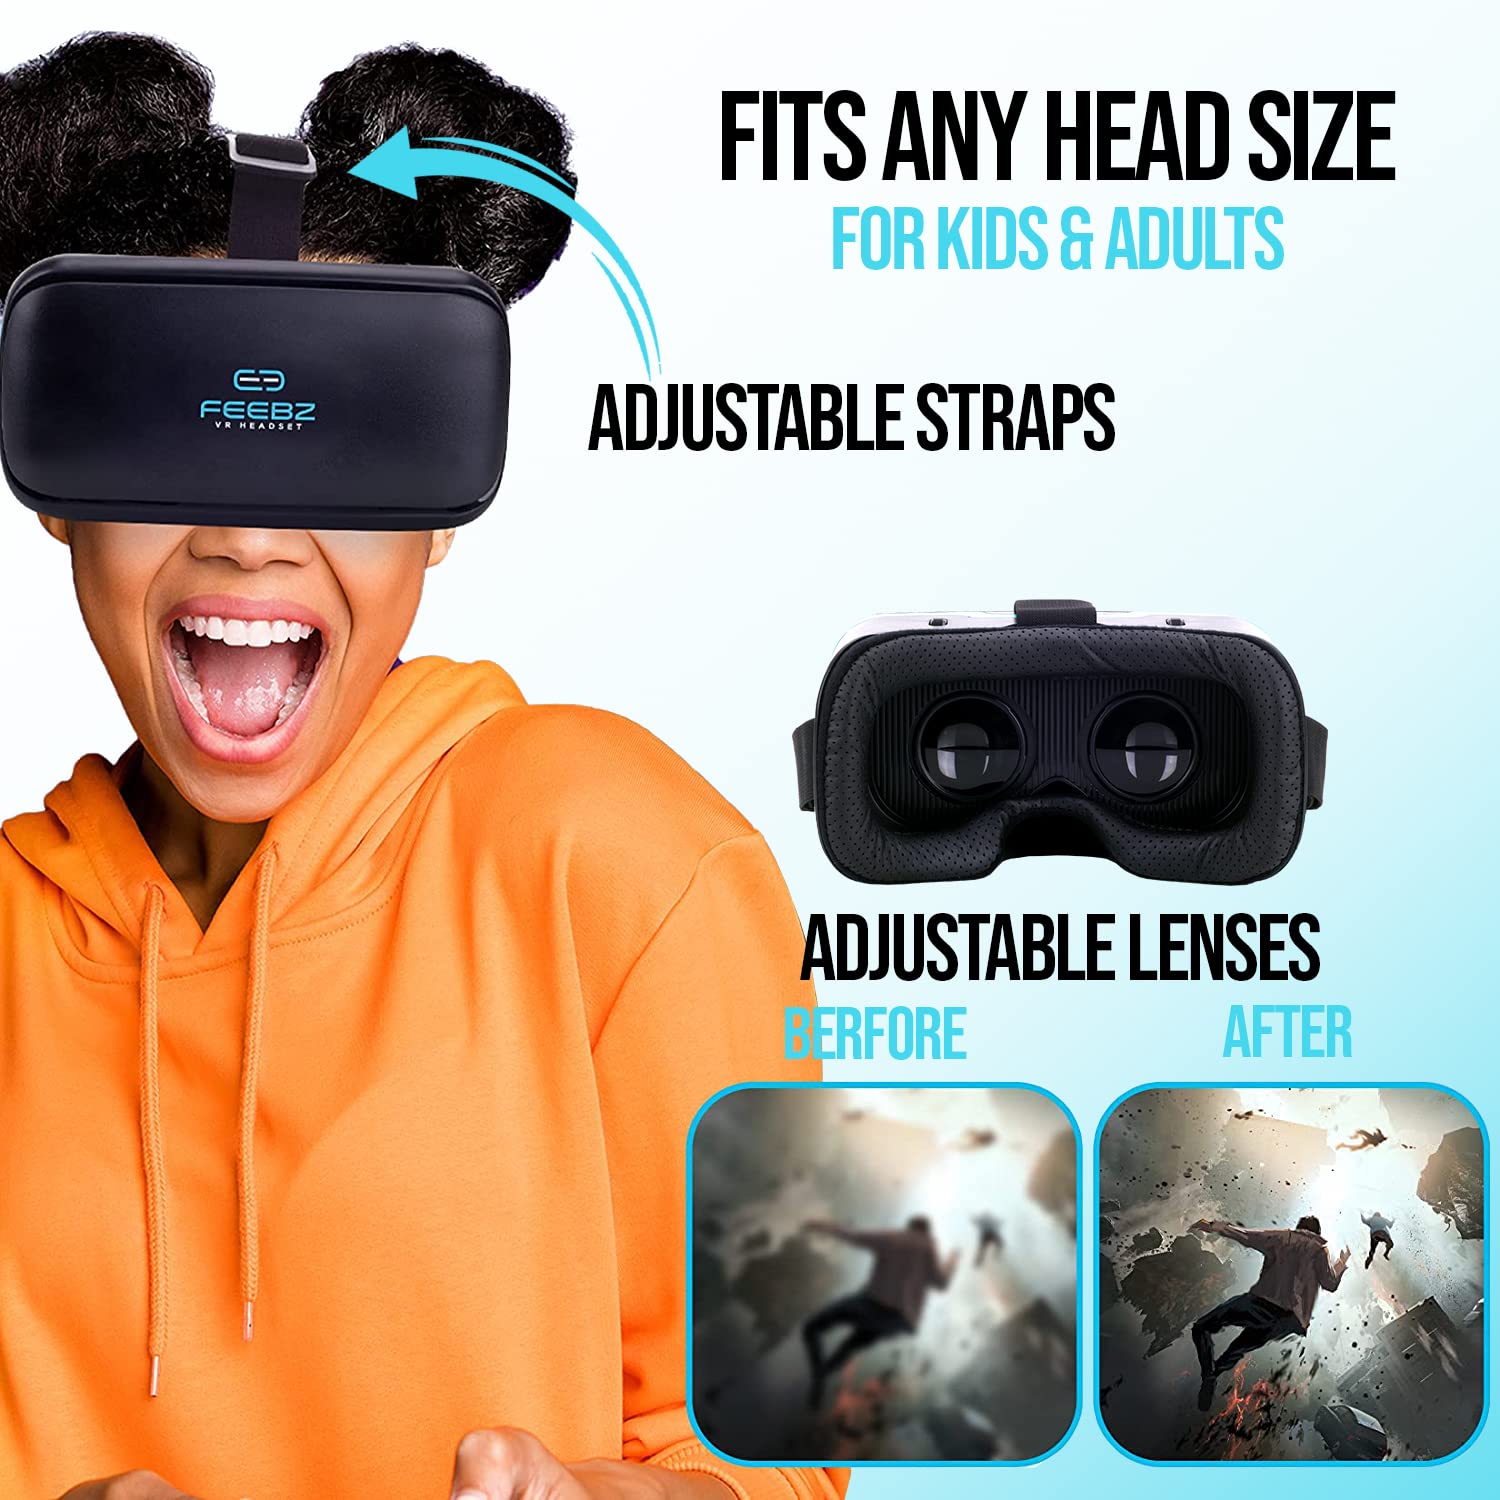 VR Headset for Android - with Built-in Action Button | Virtual Reality Goggles for 4.7”-6.5” Cell Phone - Best Set Glasses | Gift for Kids and Adults for Experiencing VR - Blue